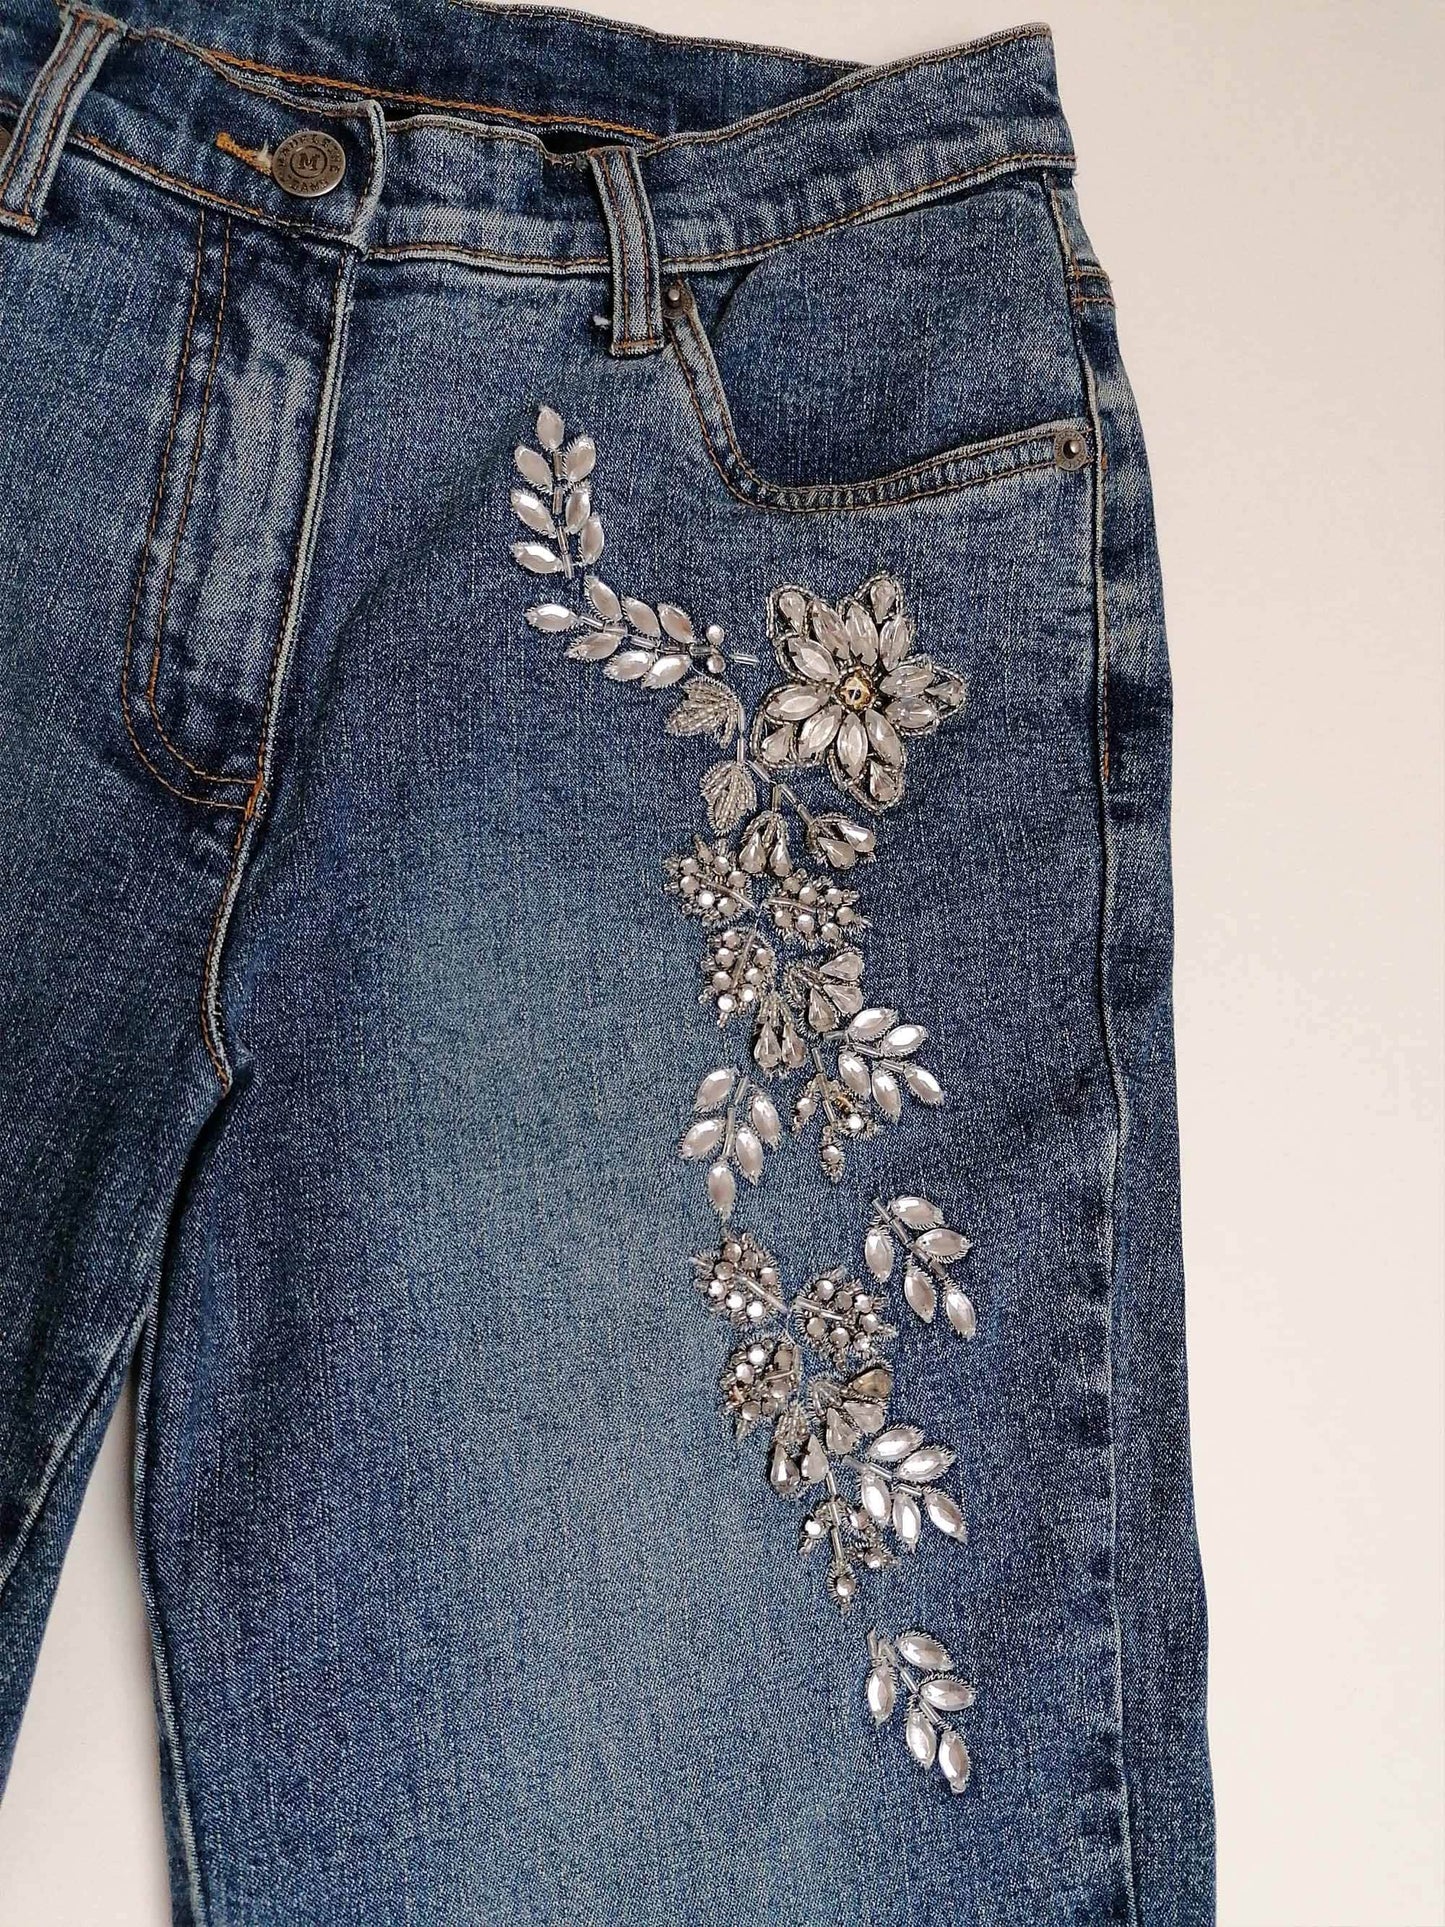 Y2K MADELEINE Embroidery Jeans - size M - 36/UK 10